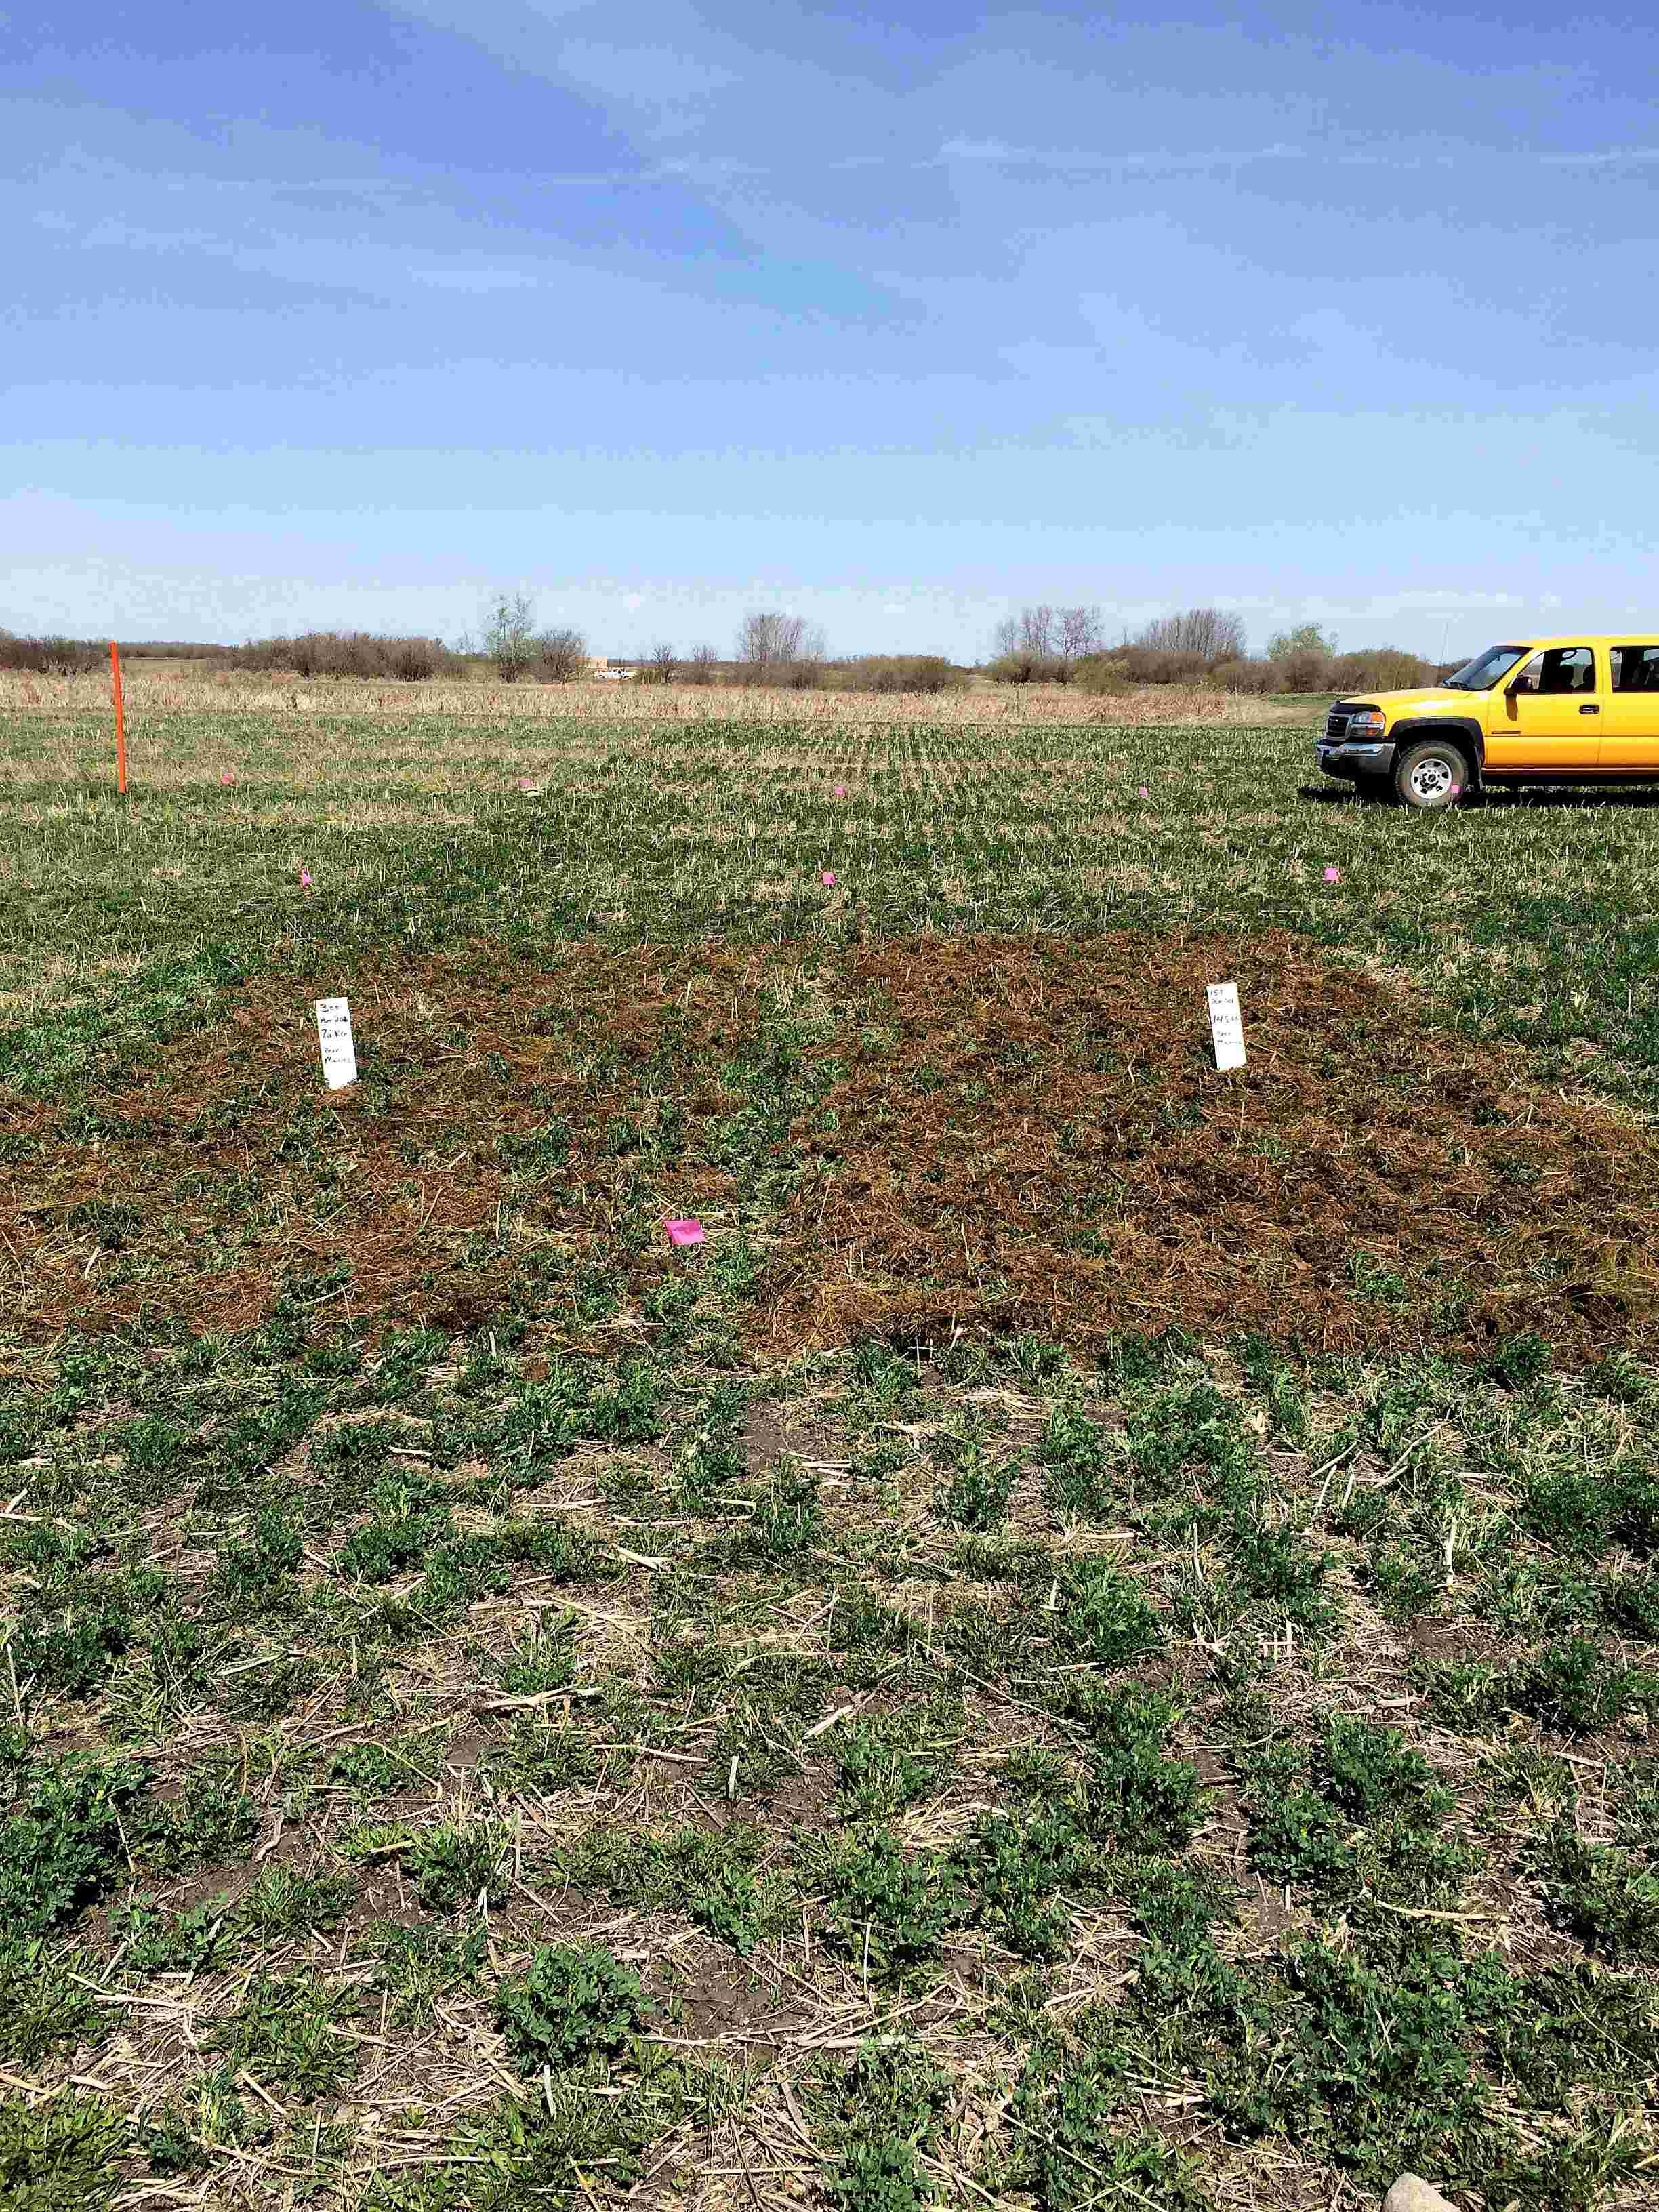 Comparison of 15 tonnes (left) and 30 tonnes (right) of manure applied